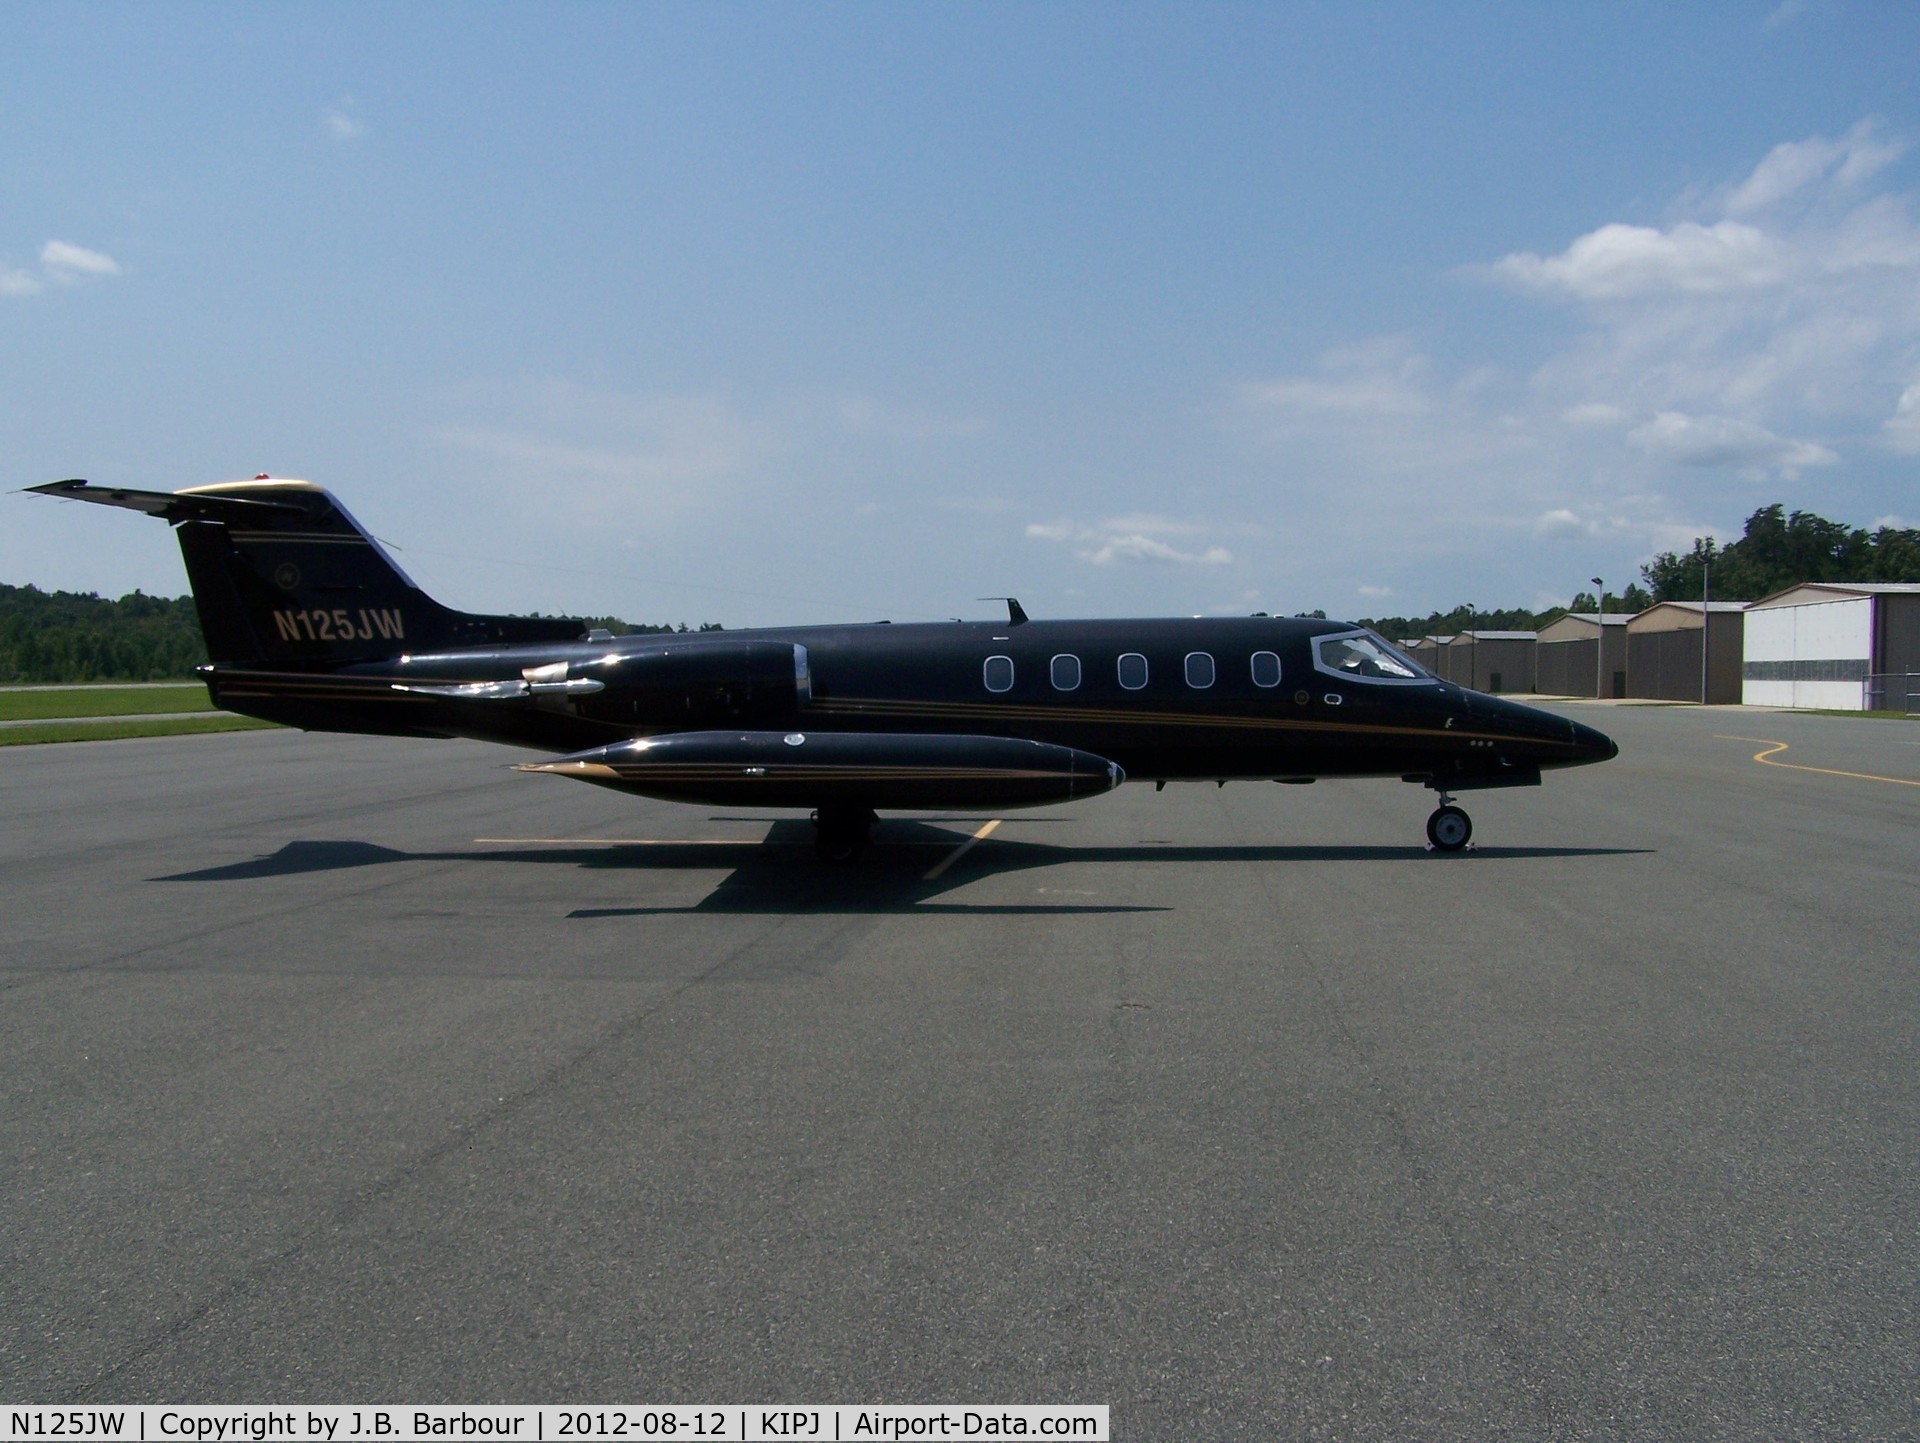 N125JW, 1981 Gates Learjet 25D C/N 352, Nice to still see these old girls out and about.